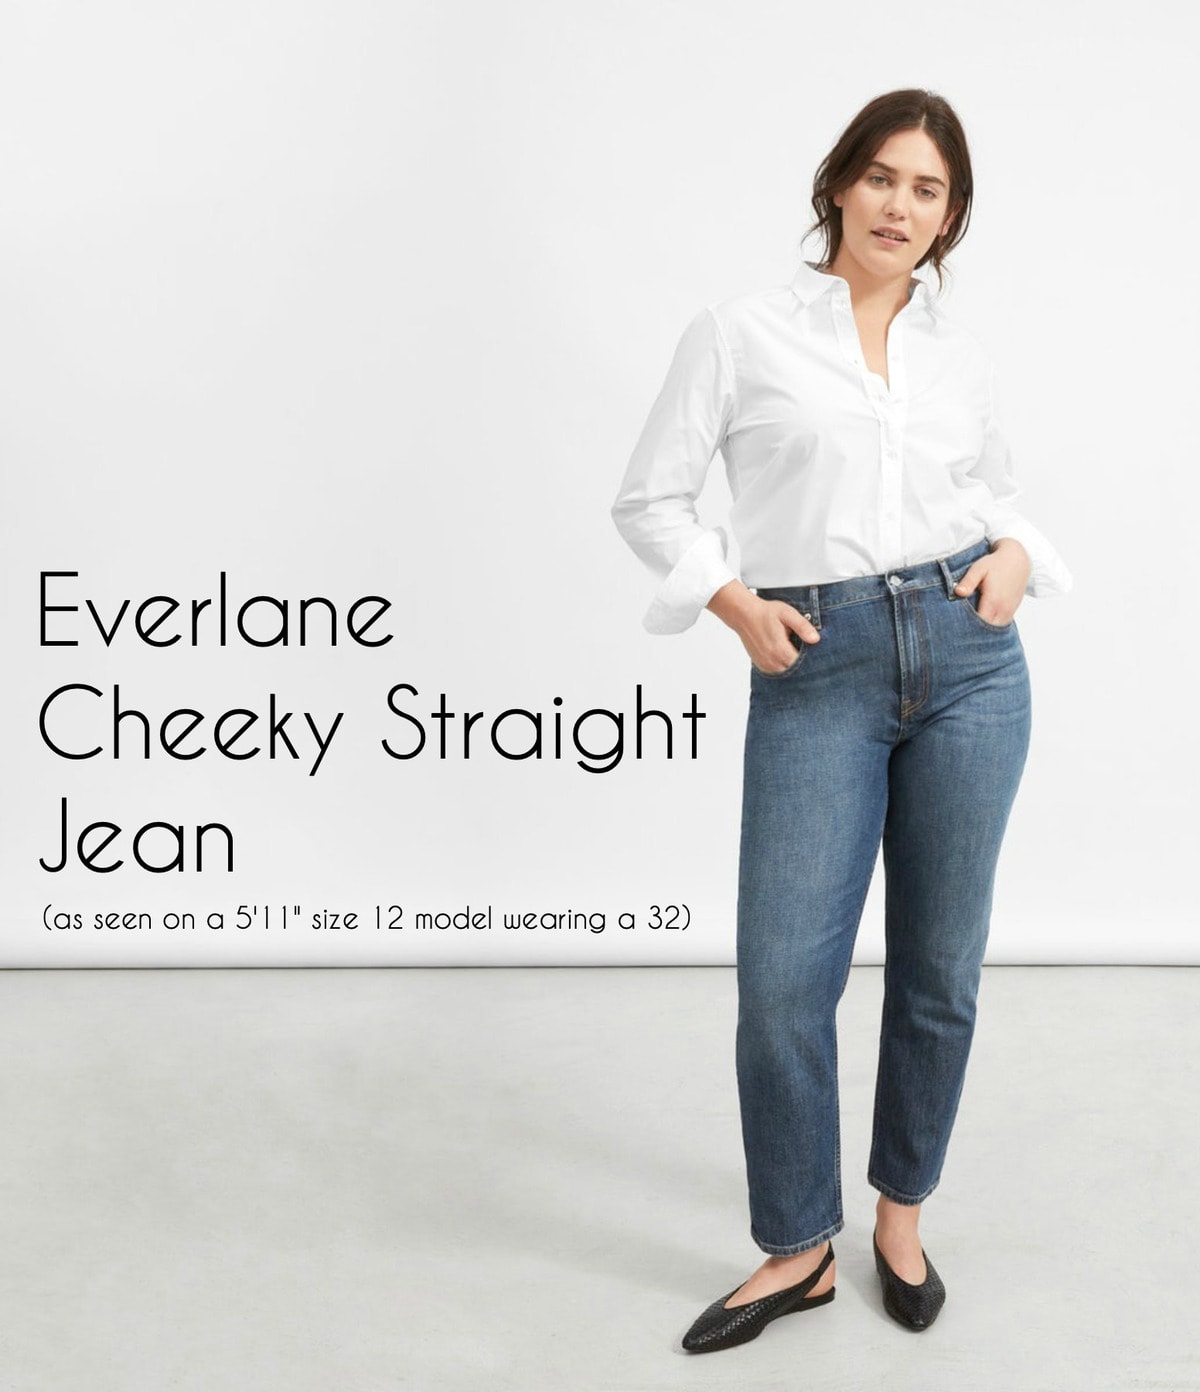 Everlane Cheeky Straight Jean Honest Review